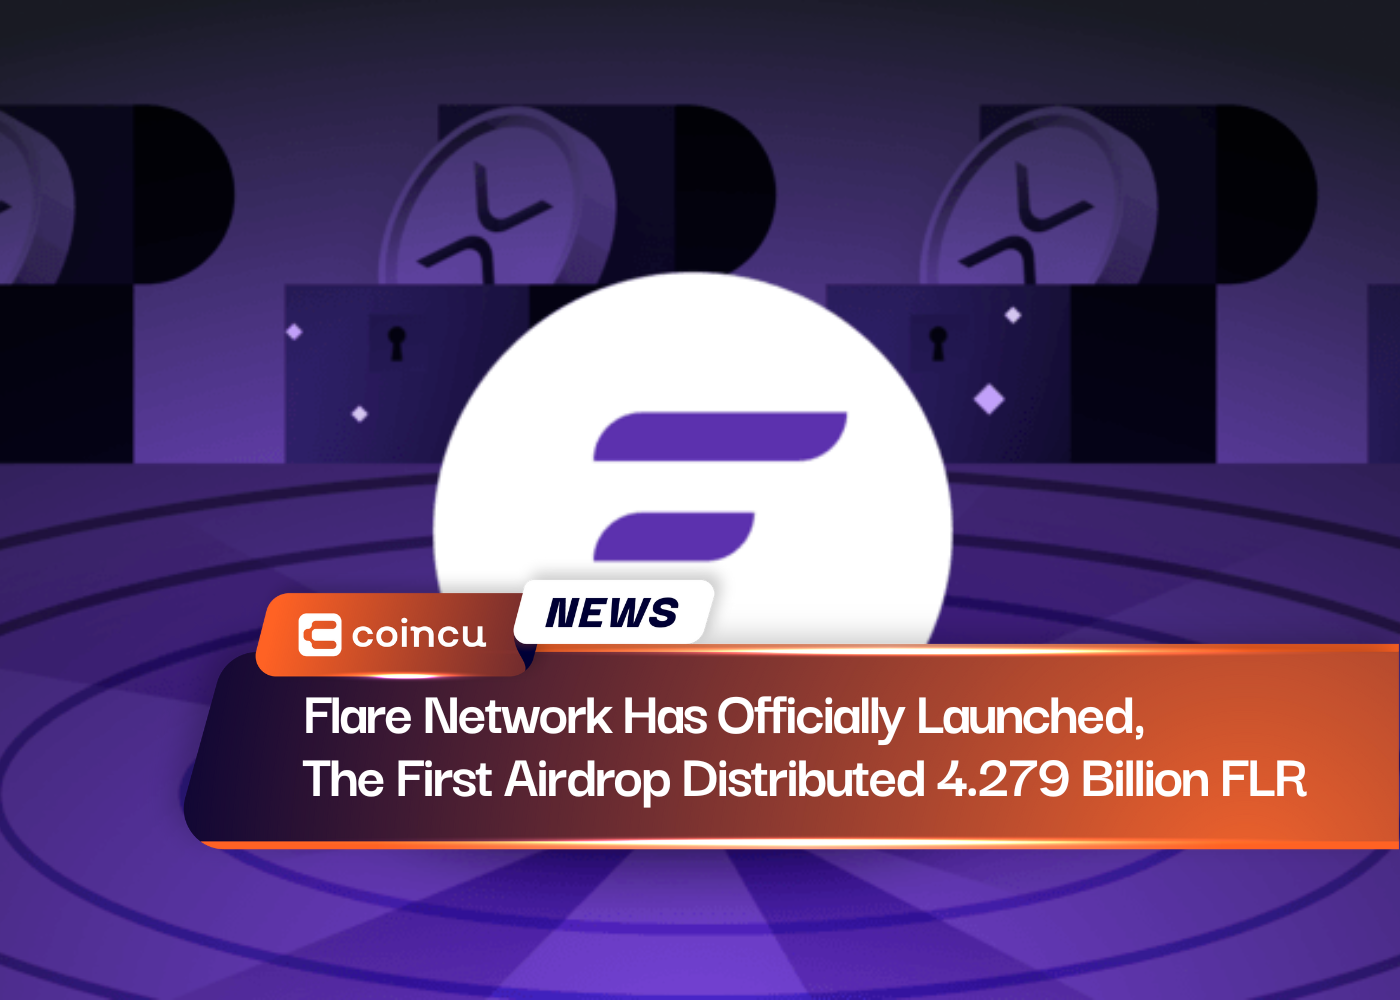 Flare Network Has Officially Launched, The First Airdrop Distributed 4.279 Billion FLR